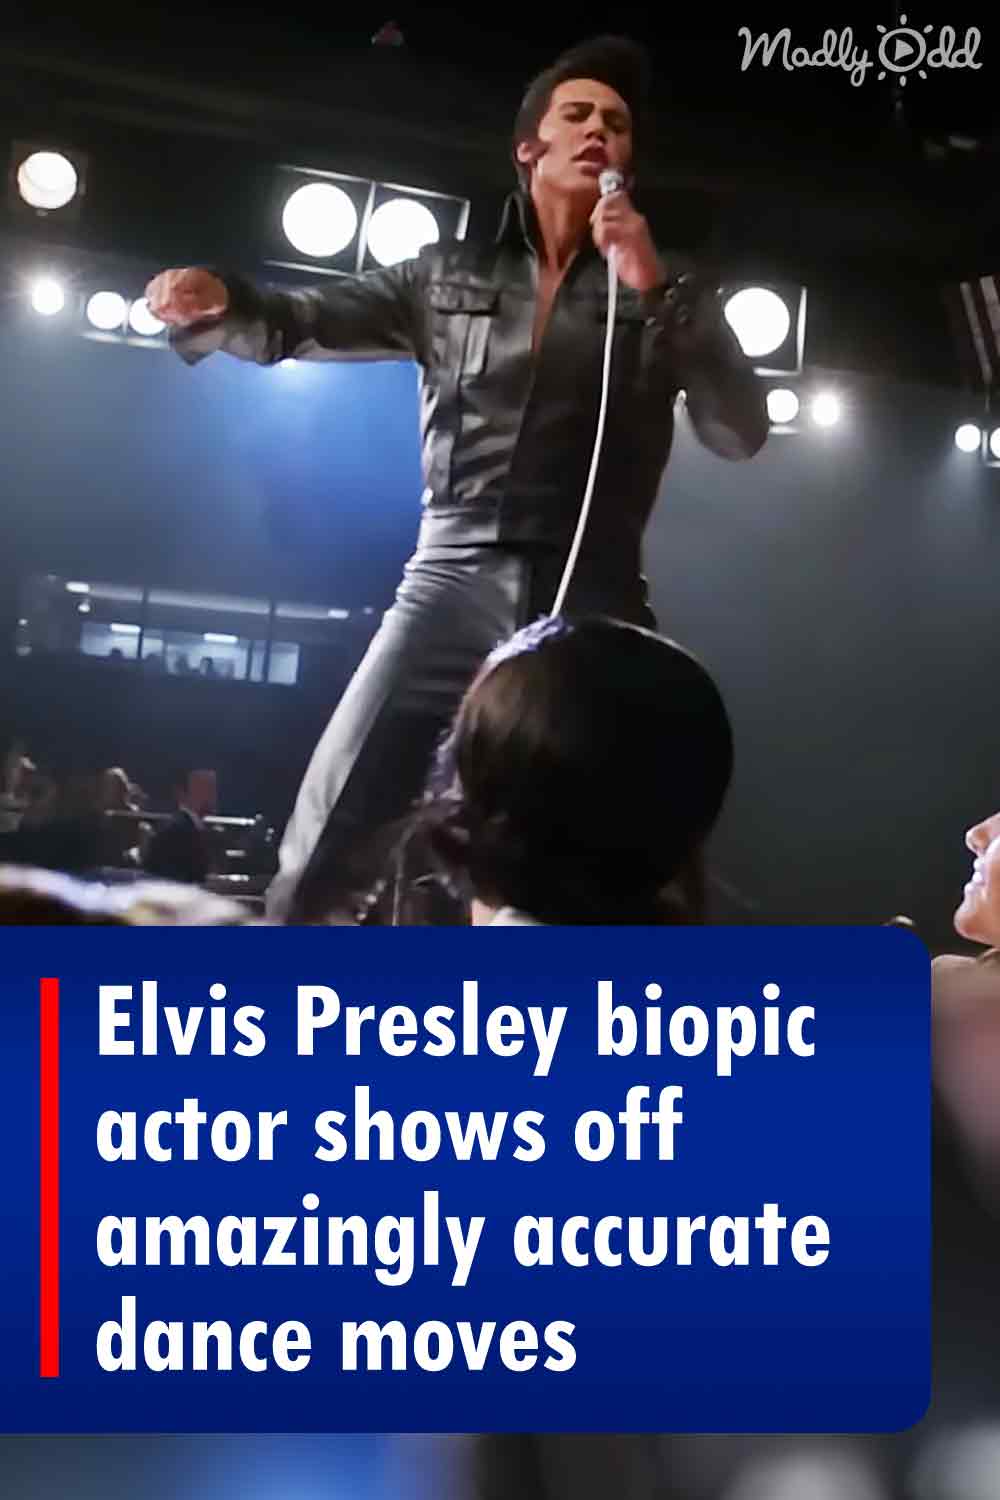 Elvis Presley biopic actor shows off amazingly accurate dance moves